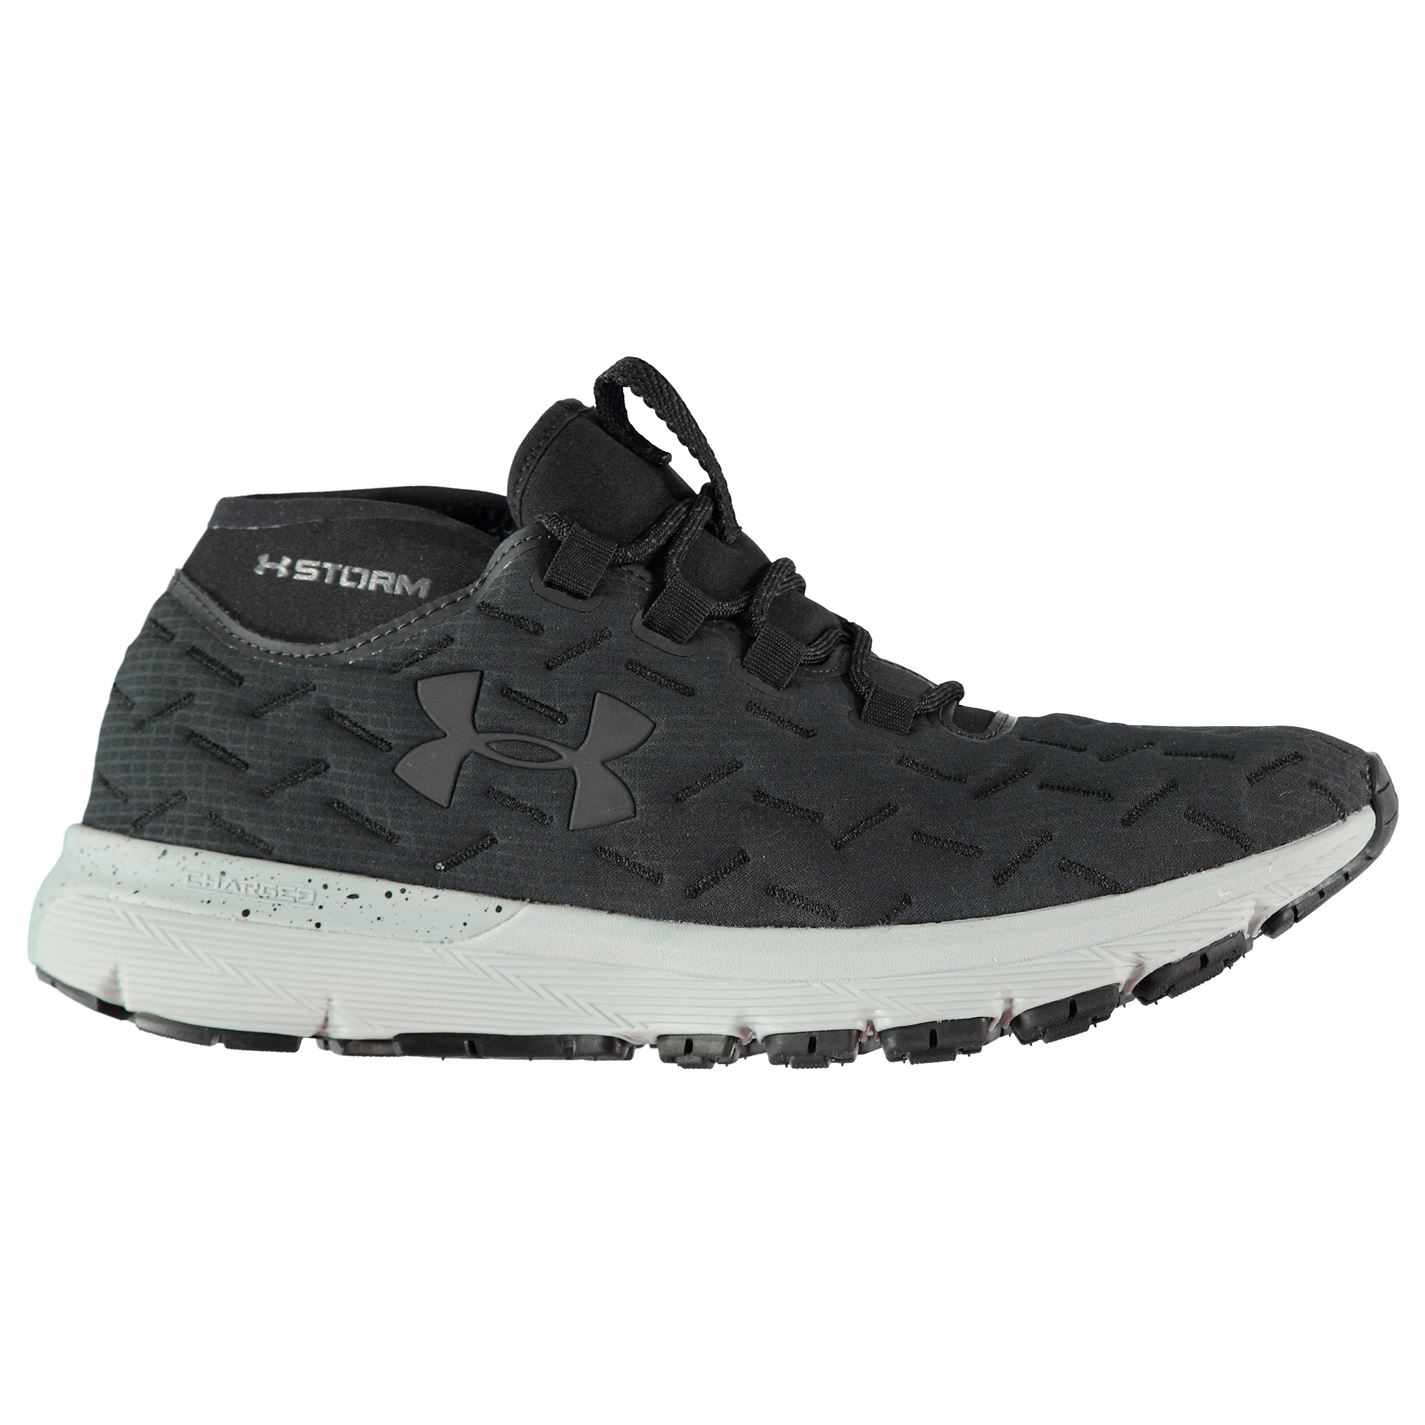 Under Armour Charged Reactor Run Mens Running Shoes